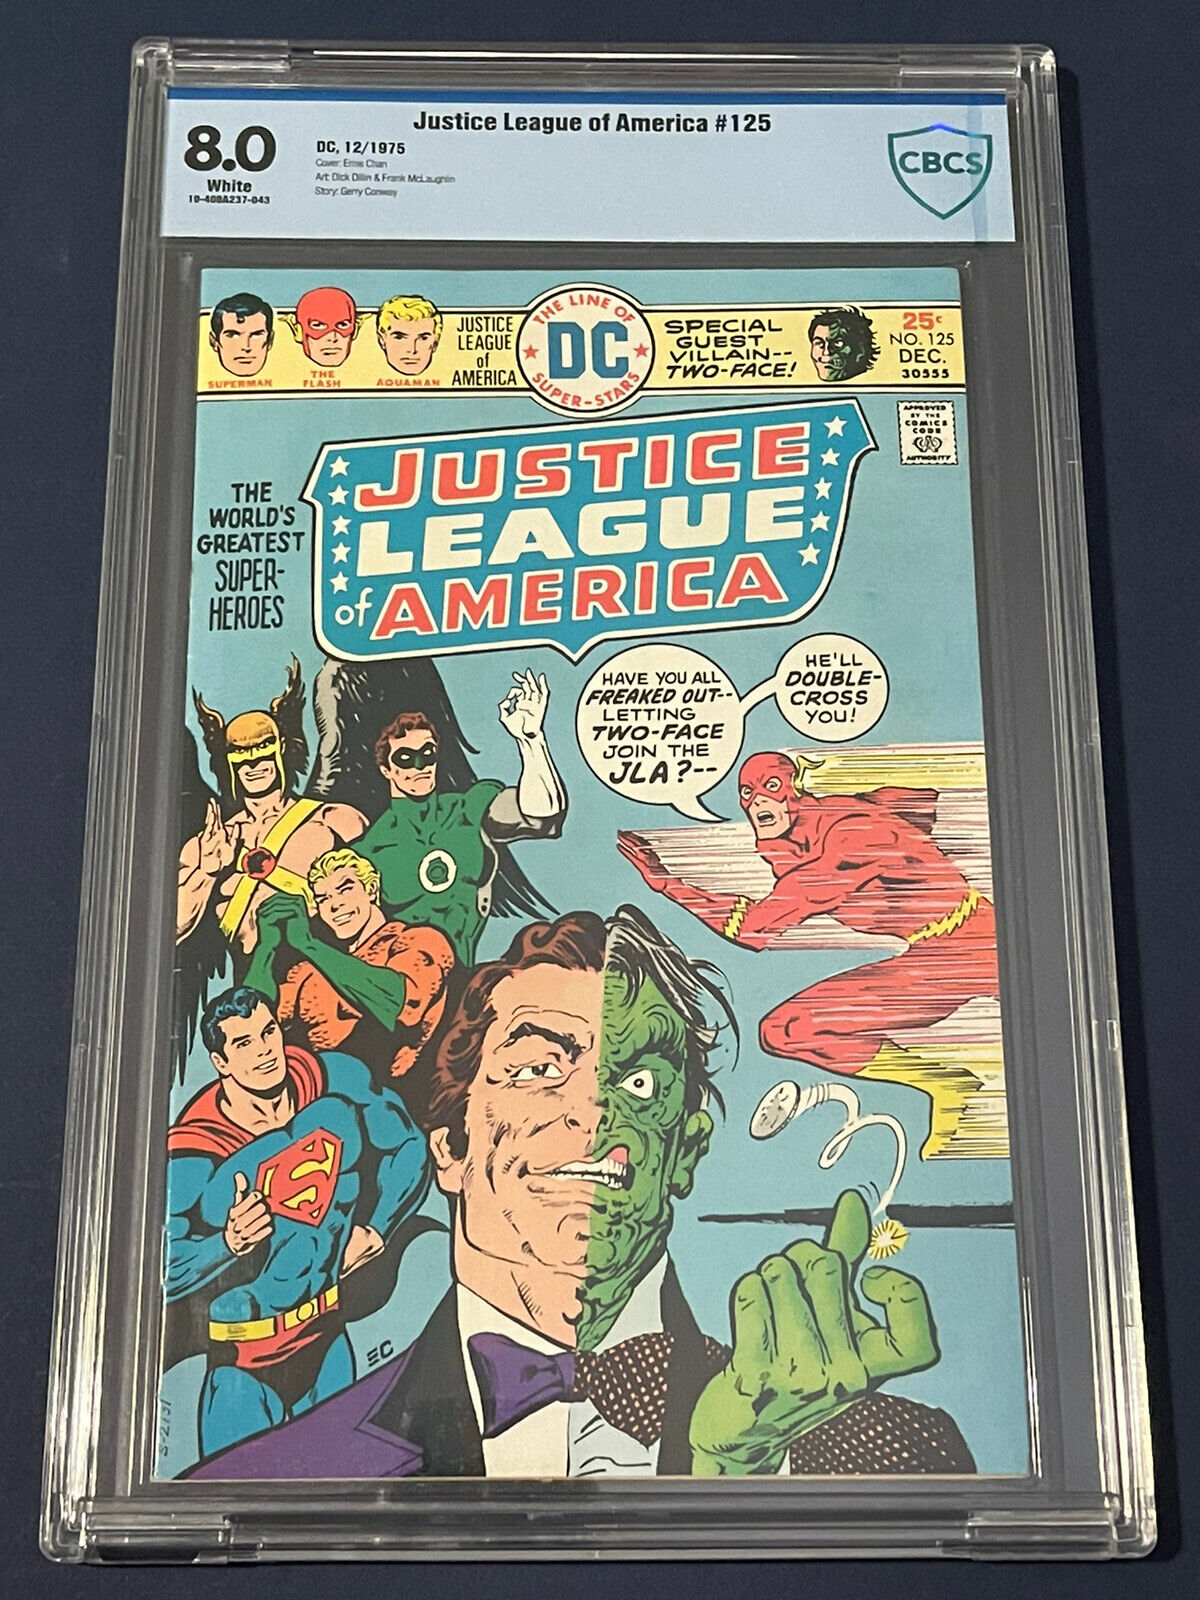 Justice League of America #125 1975 CBCS 8.0 Two-Face Appearance.